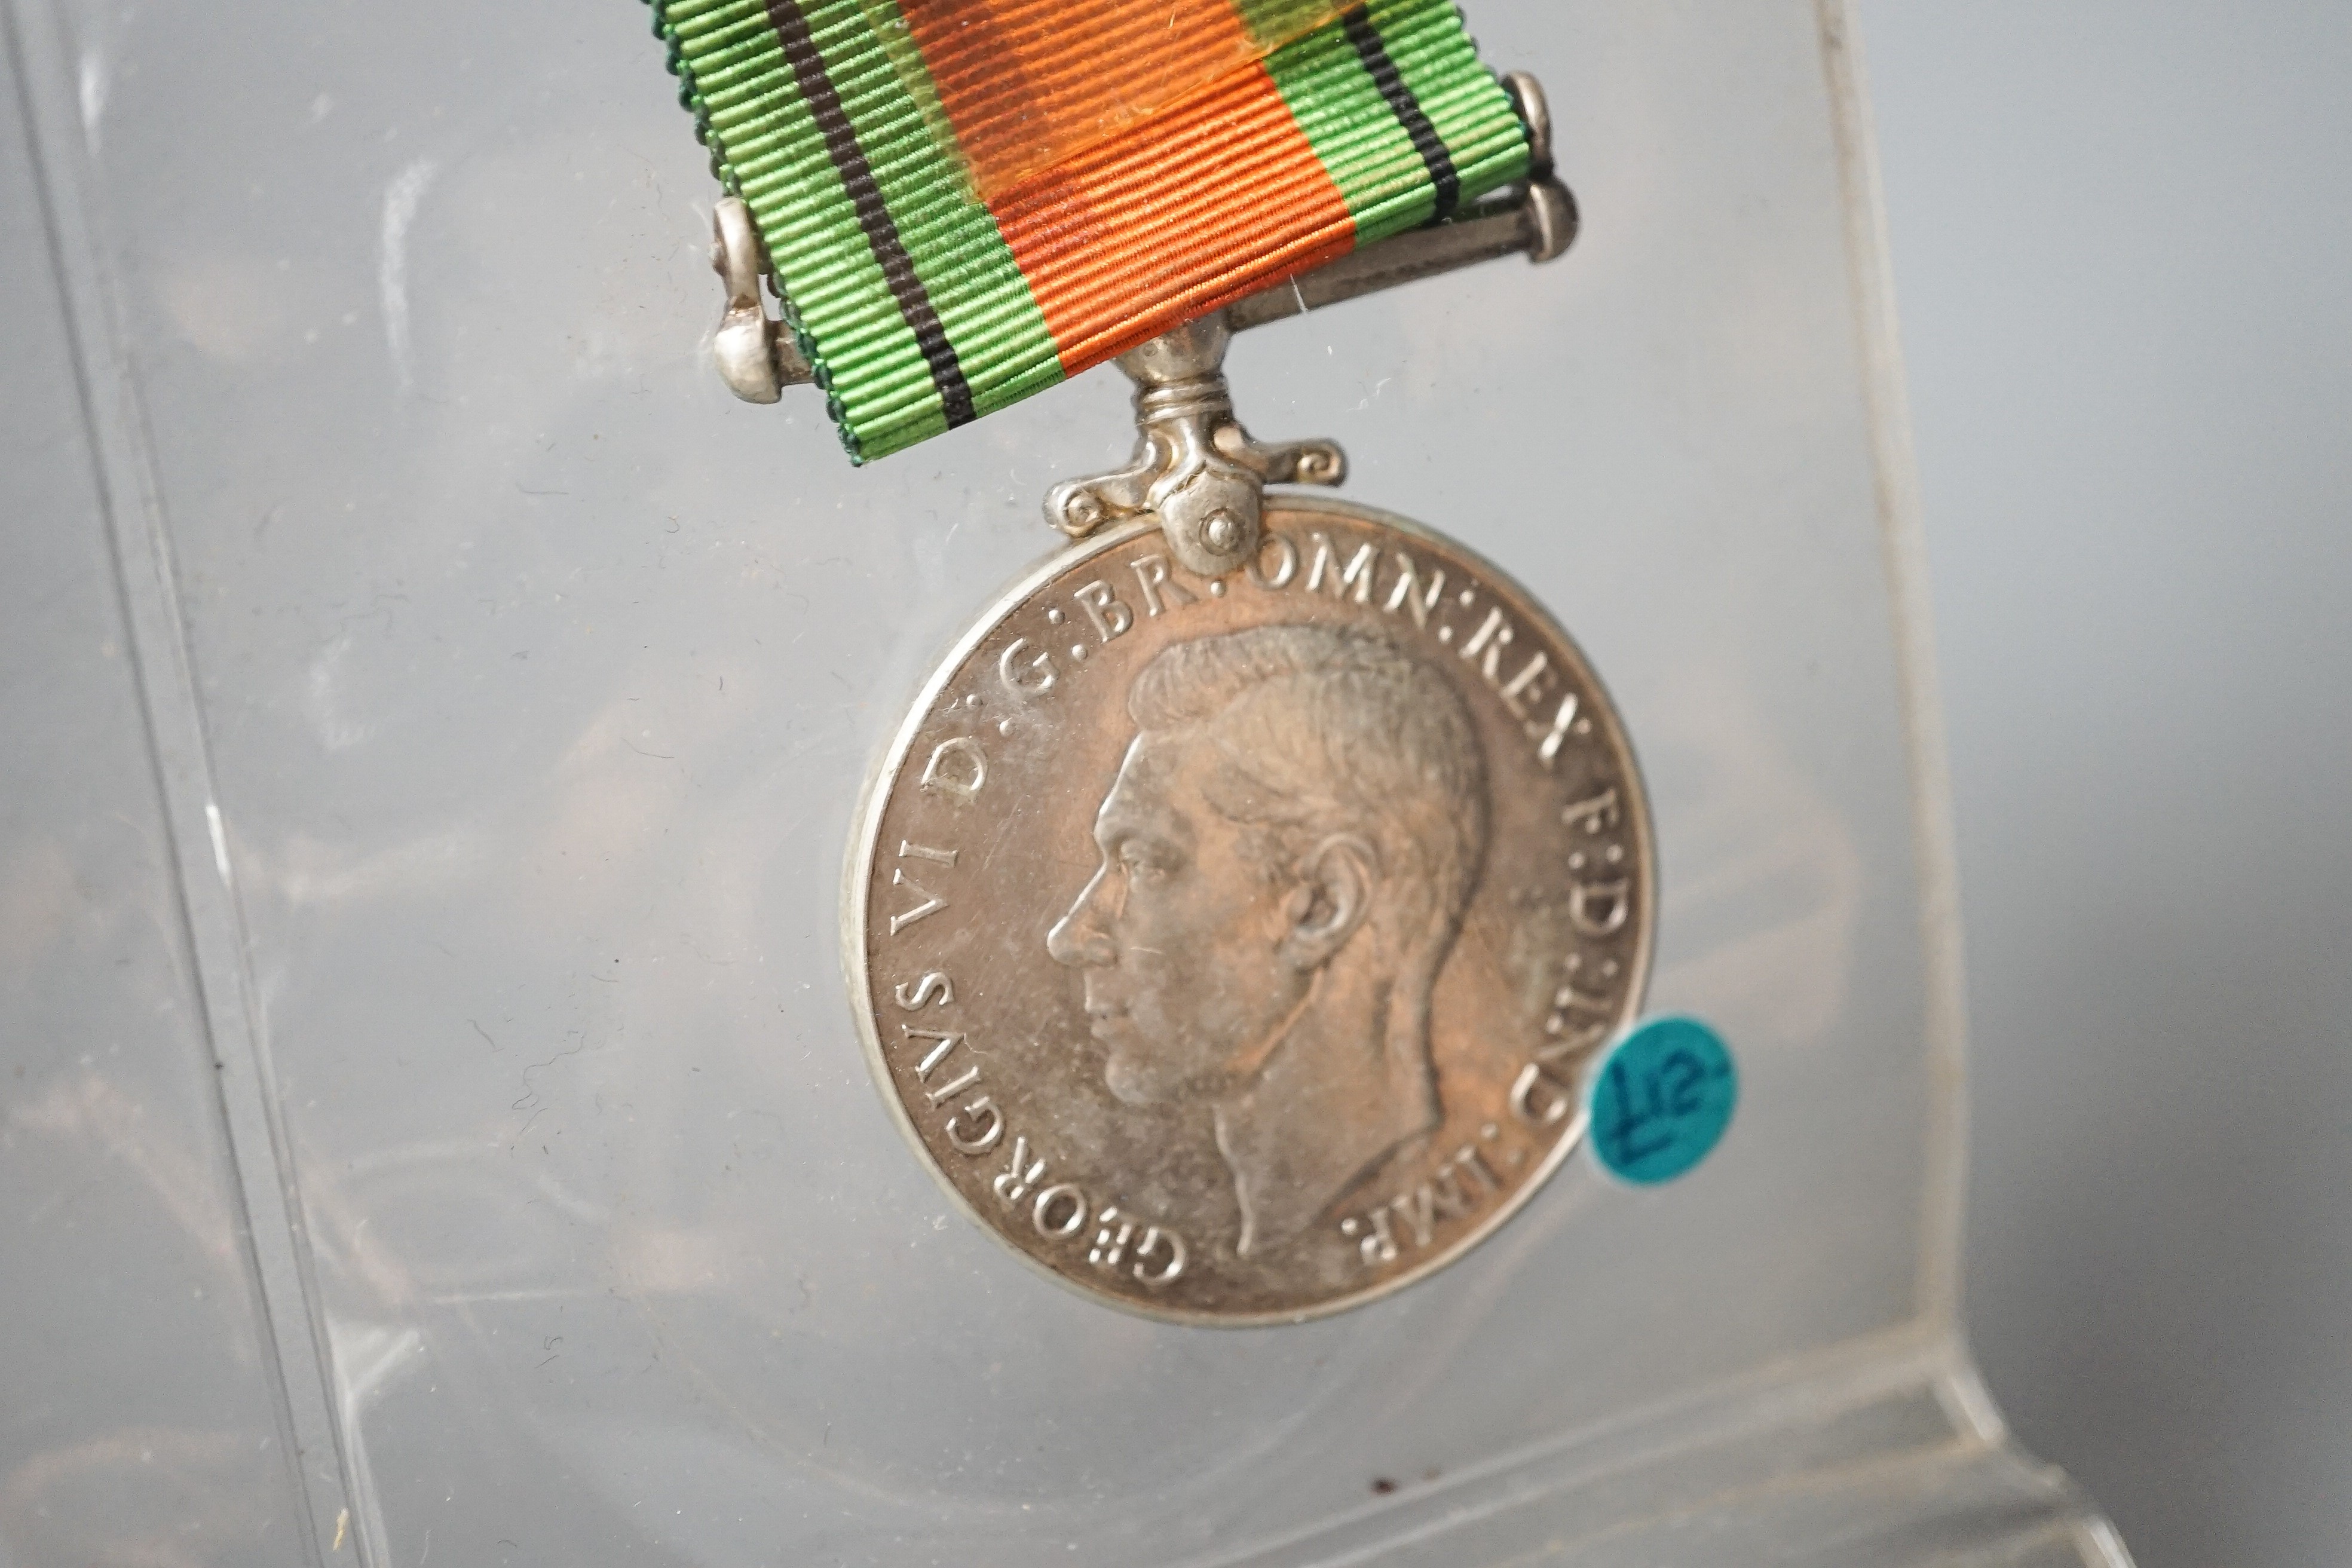 Fifteen unnamed WW2 medals to include Aircrew Europe star, 1939-1945 star (two), the Africa star, - Image 7 of 15